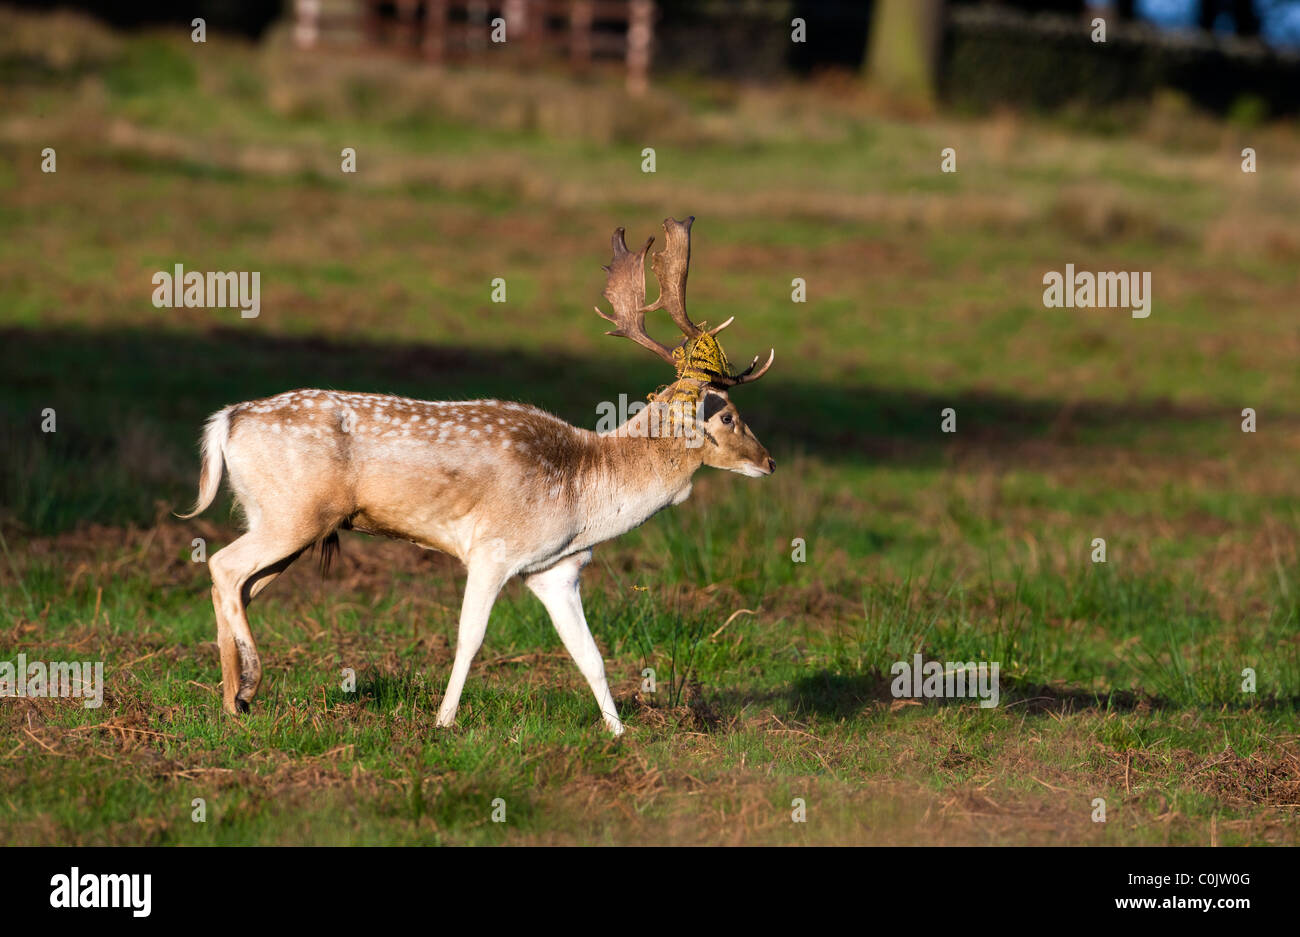 Deer Dama dama, Bradgate Park, public park in Charnwood Forest, Newton Linford, Leicestershire, UK, Europe Stock Photo